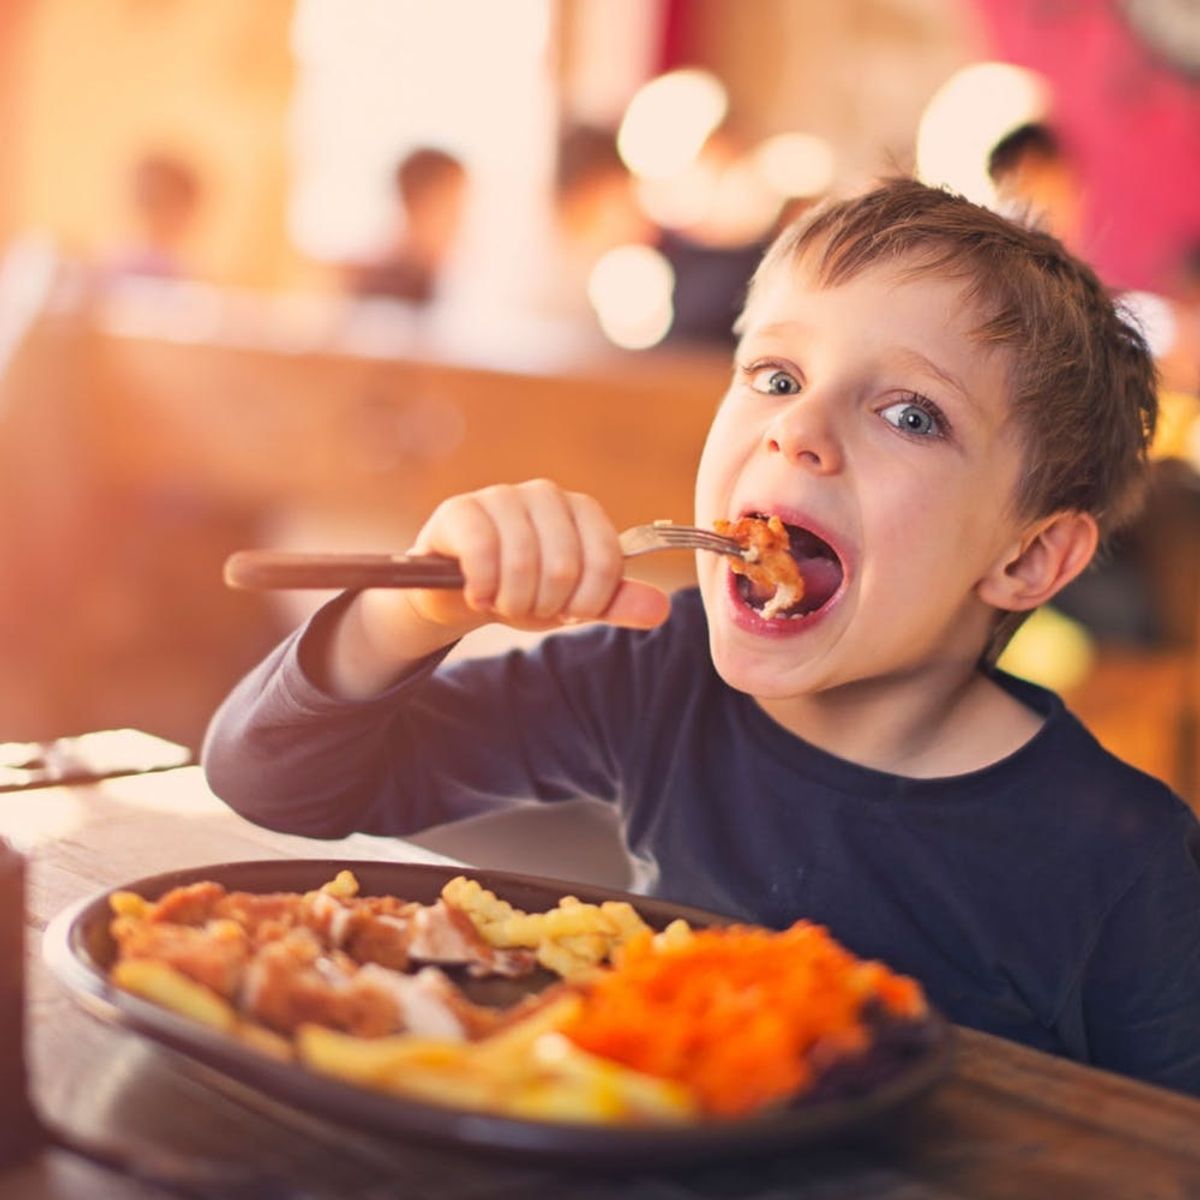 6 Expert Tips for Dining Out With Kids